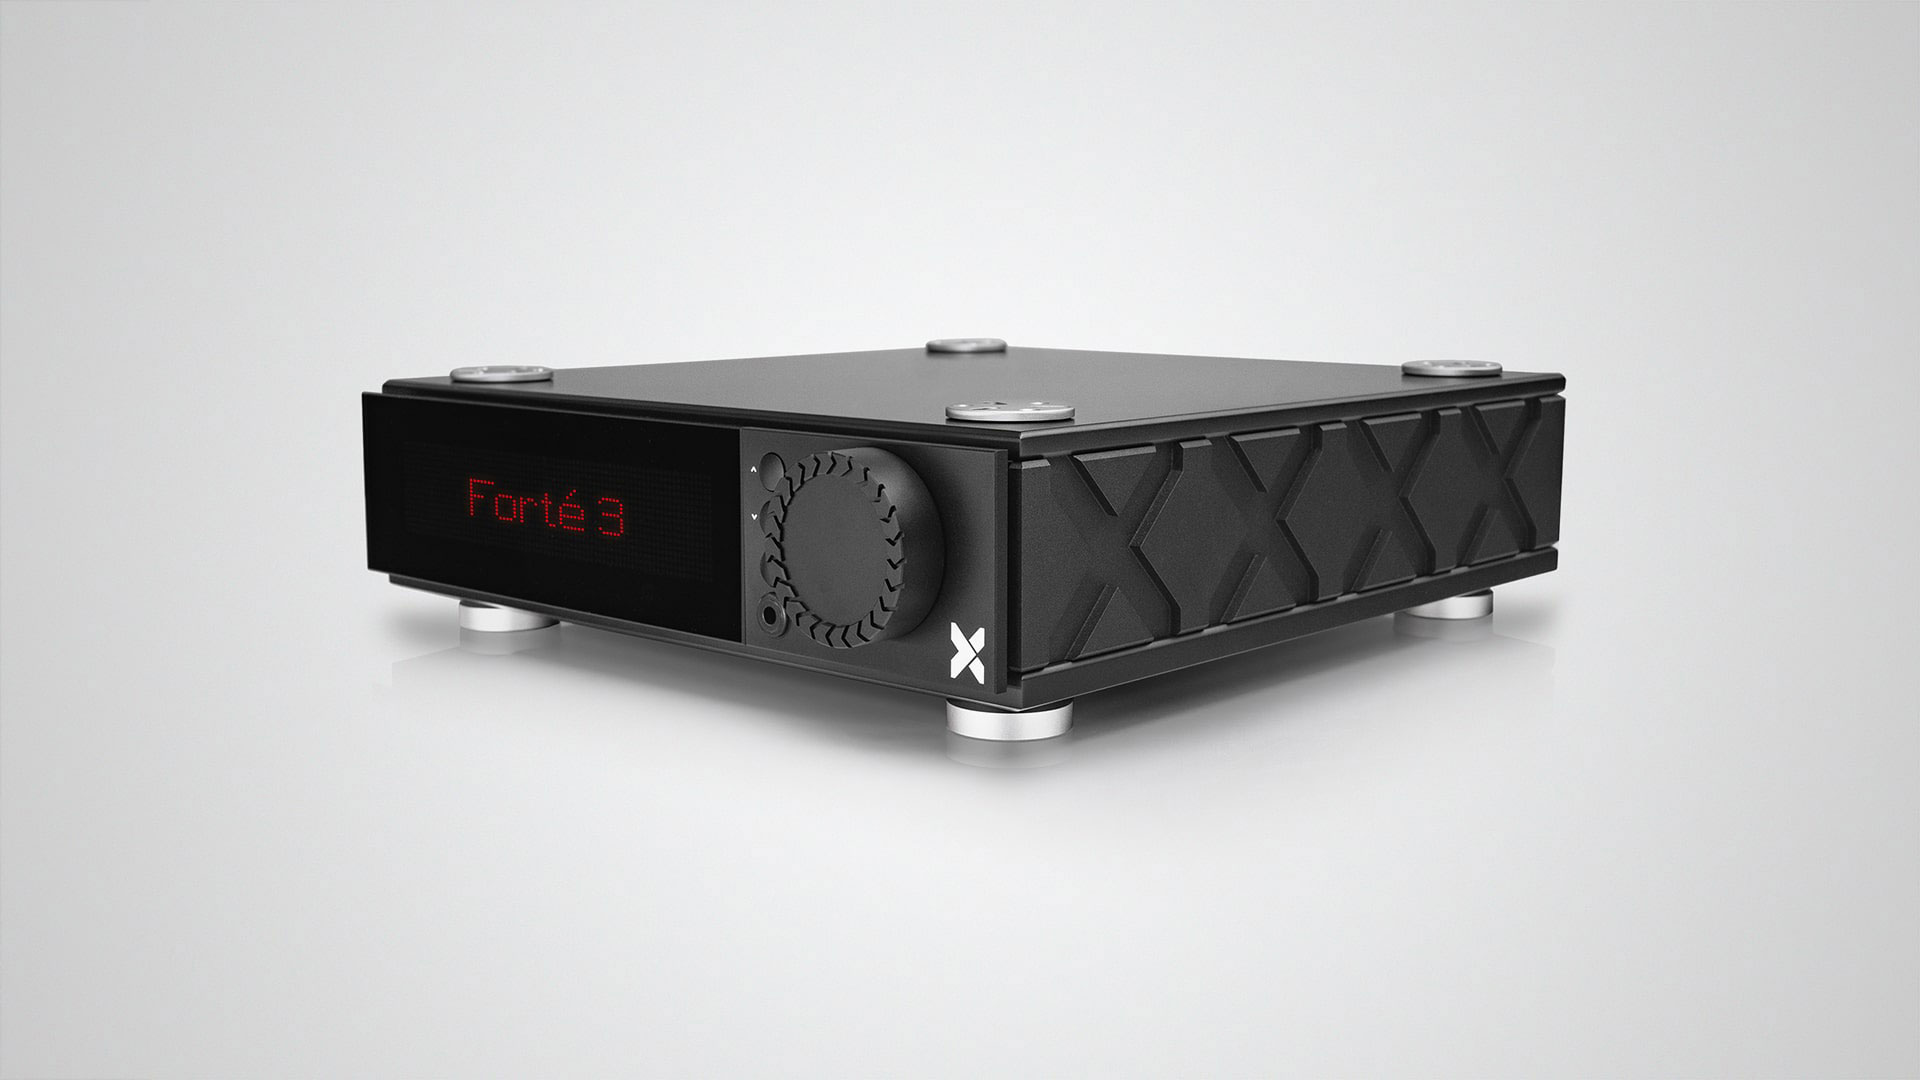 The "Forté 3" from new brand "Axxess" (Image Credit: Axxess / Audio Group Denmark)